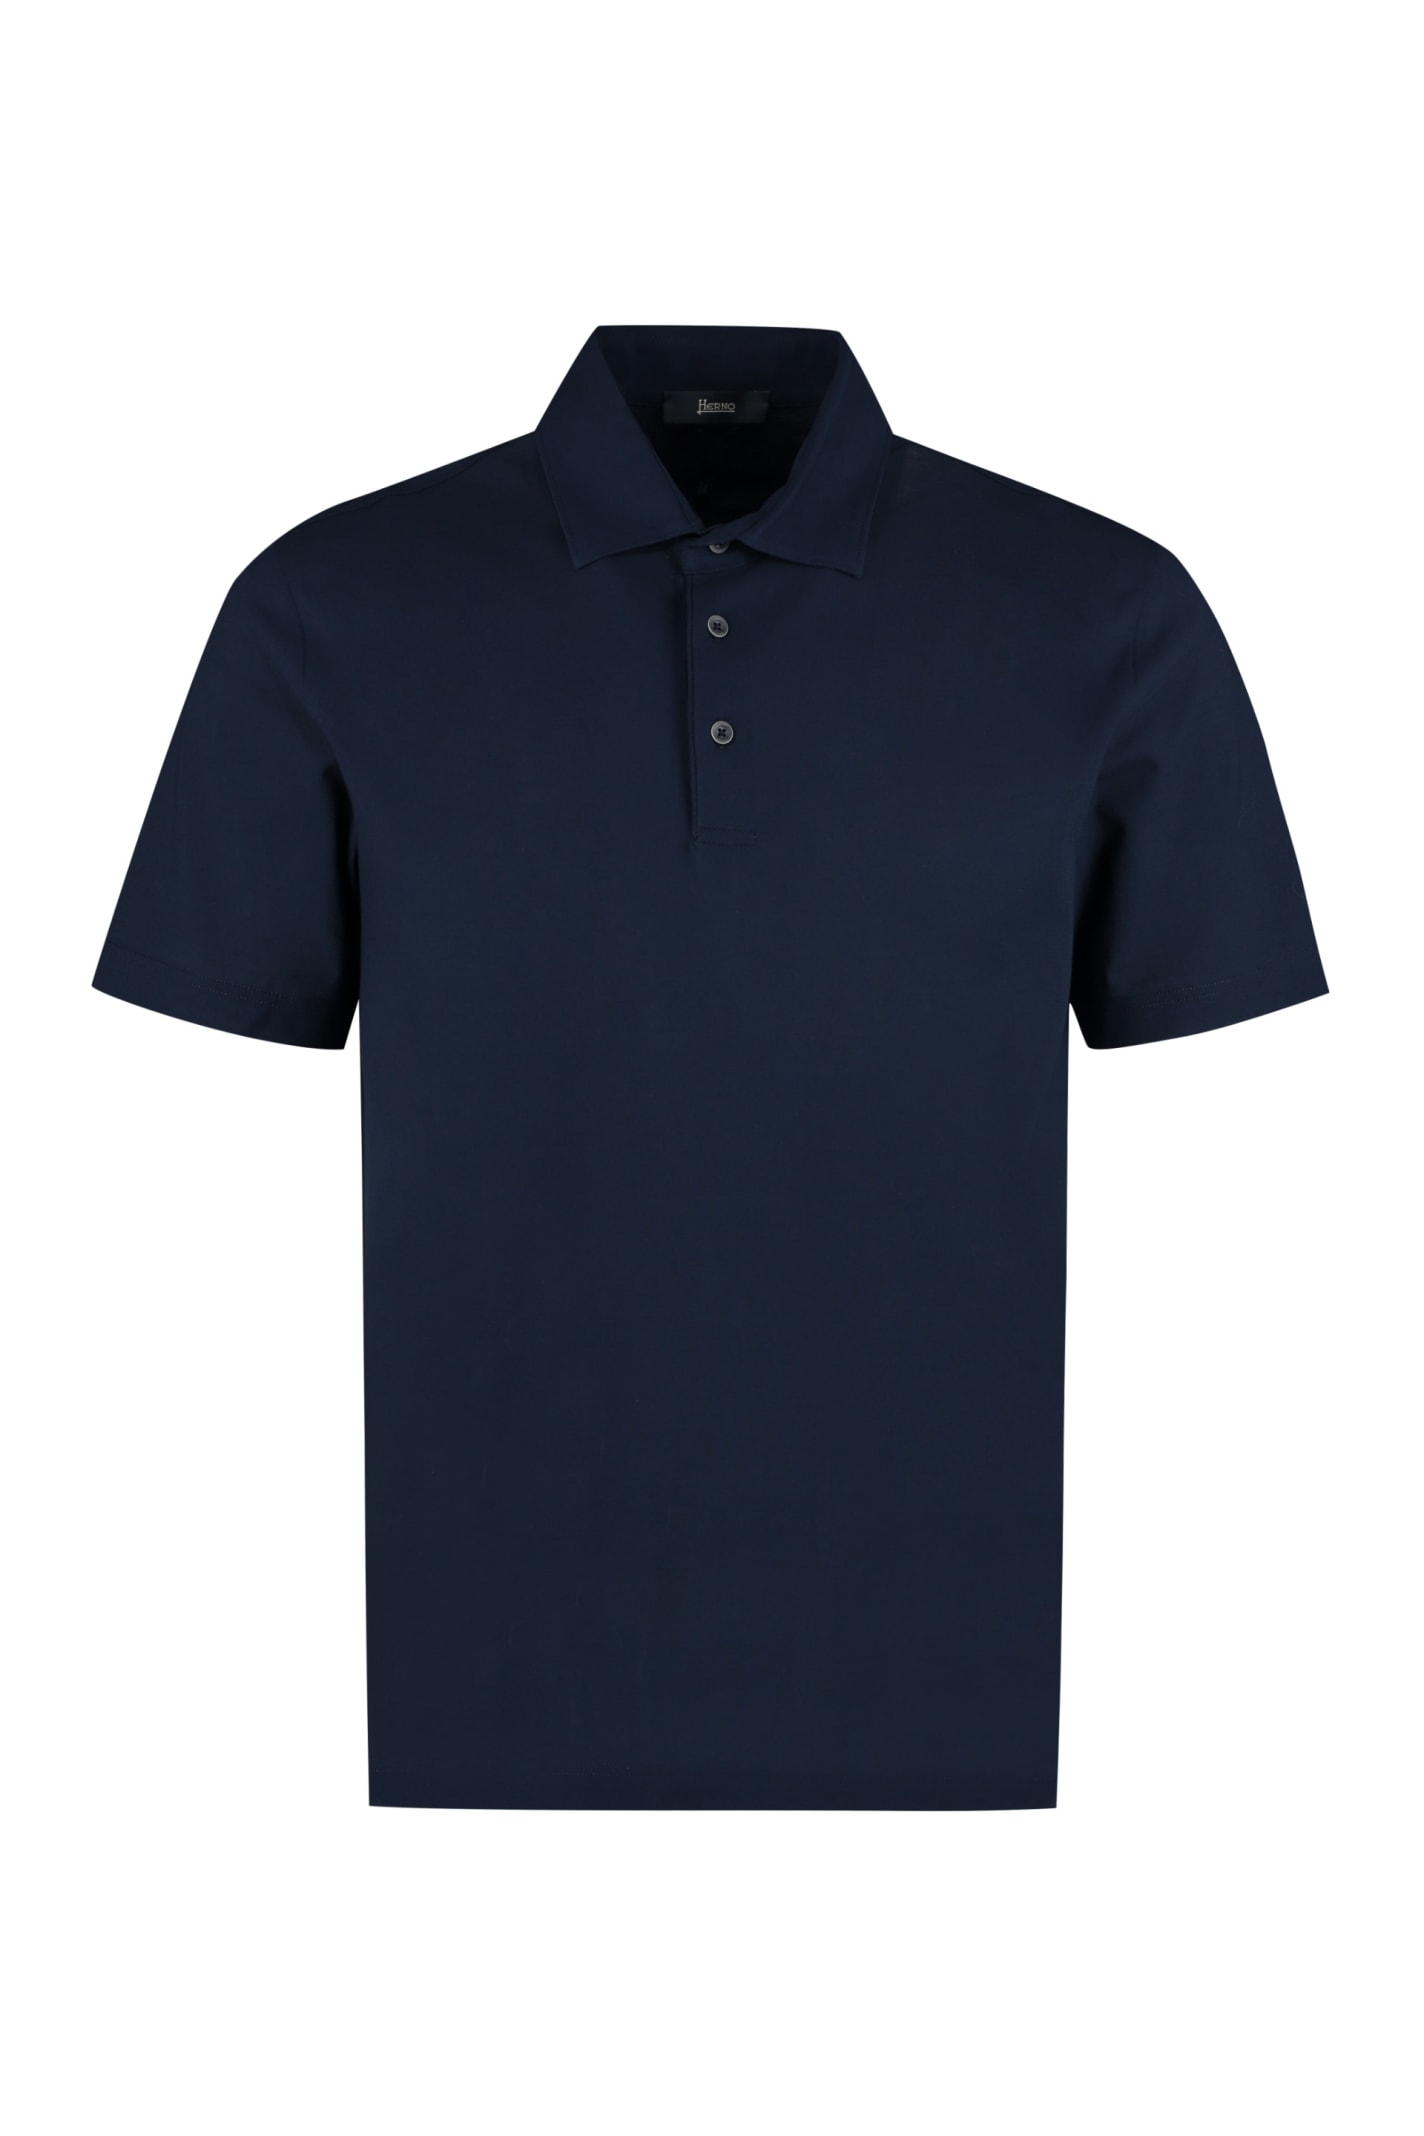 Herno Cotton Jersey Polo Shirt In Blue